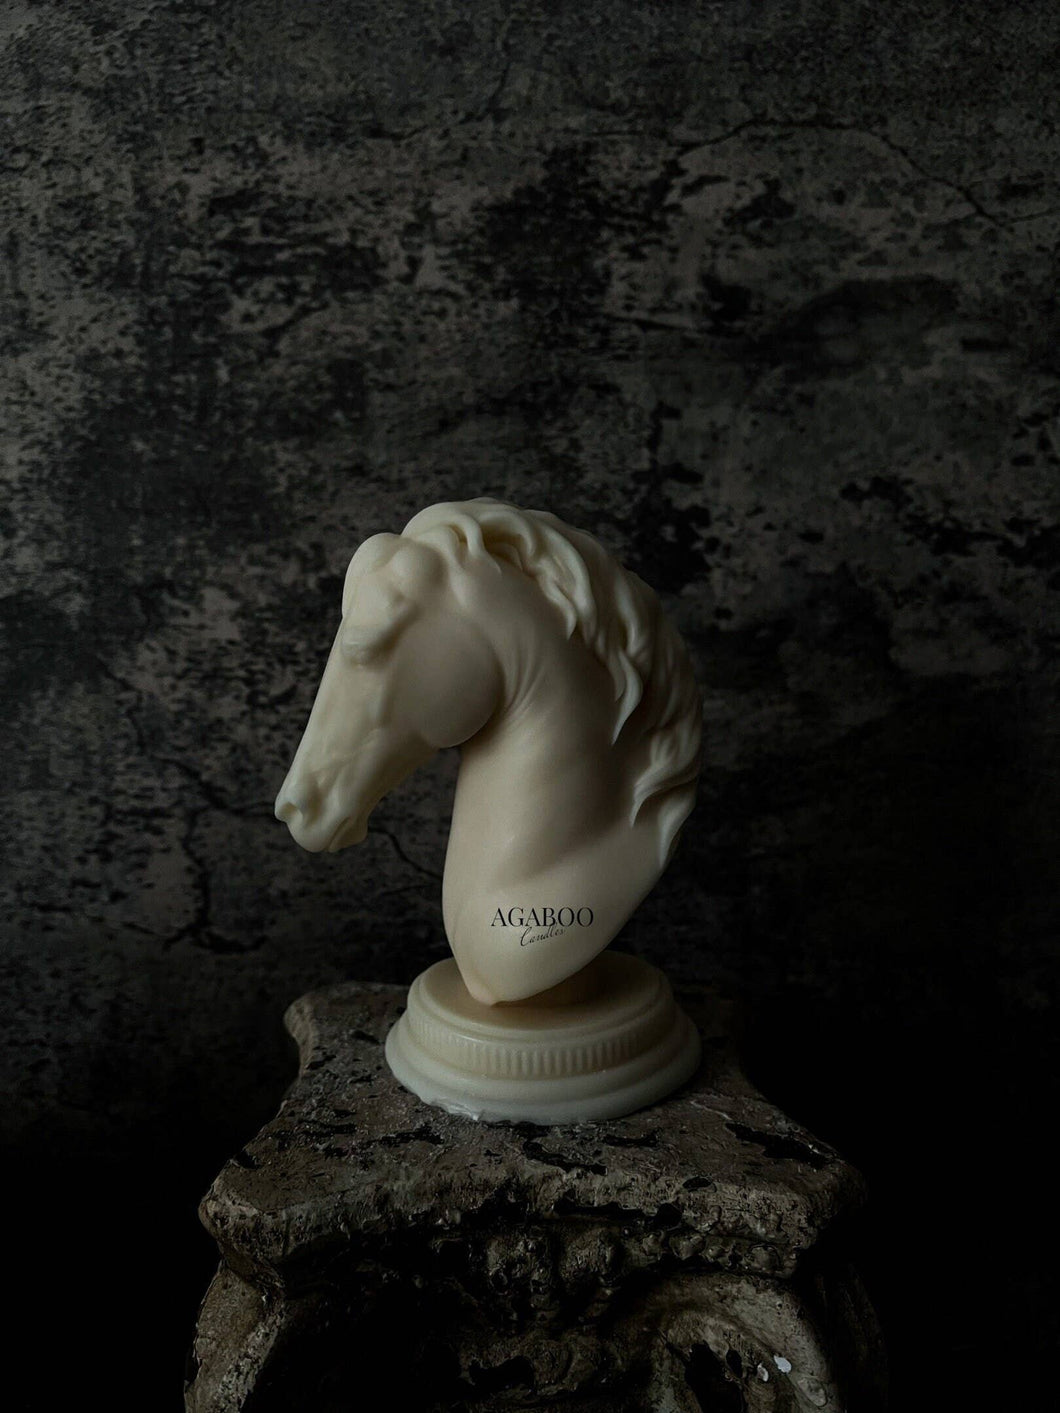 Agaboo Candle - Horse Head Candle 6x4.5in: Unscented / Cream